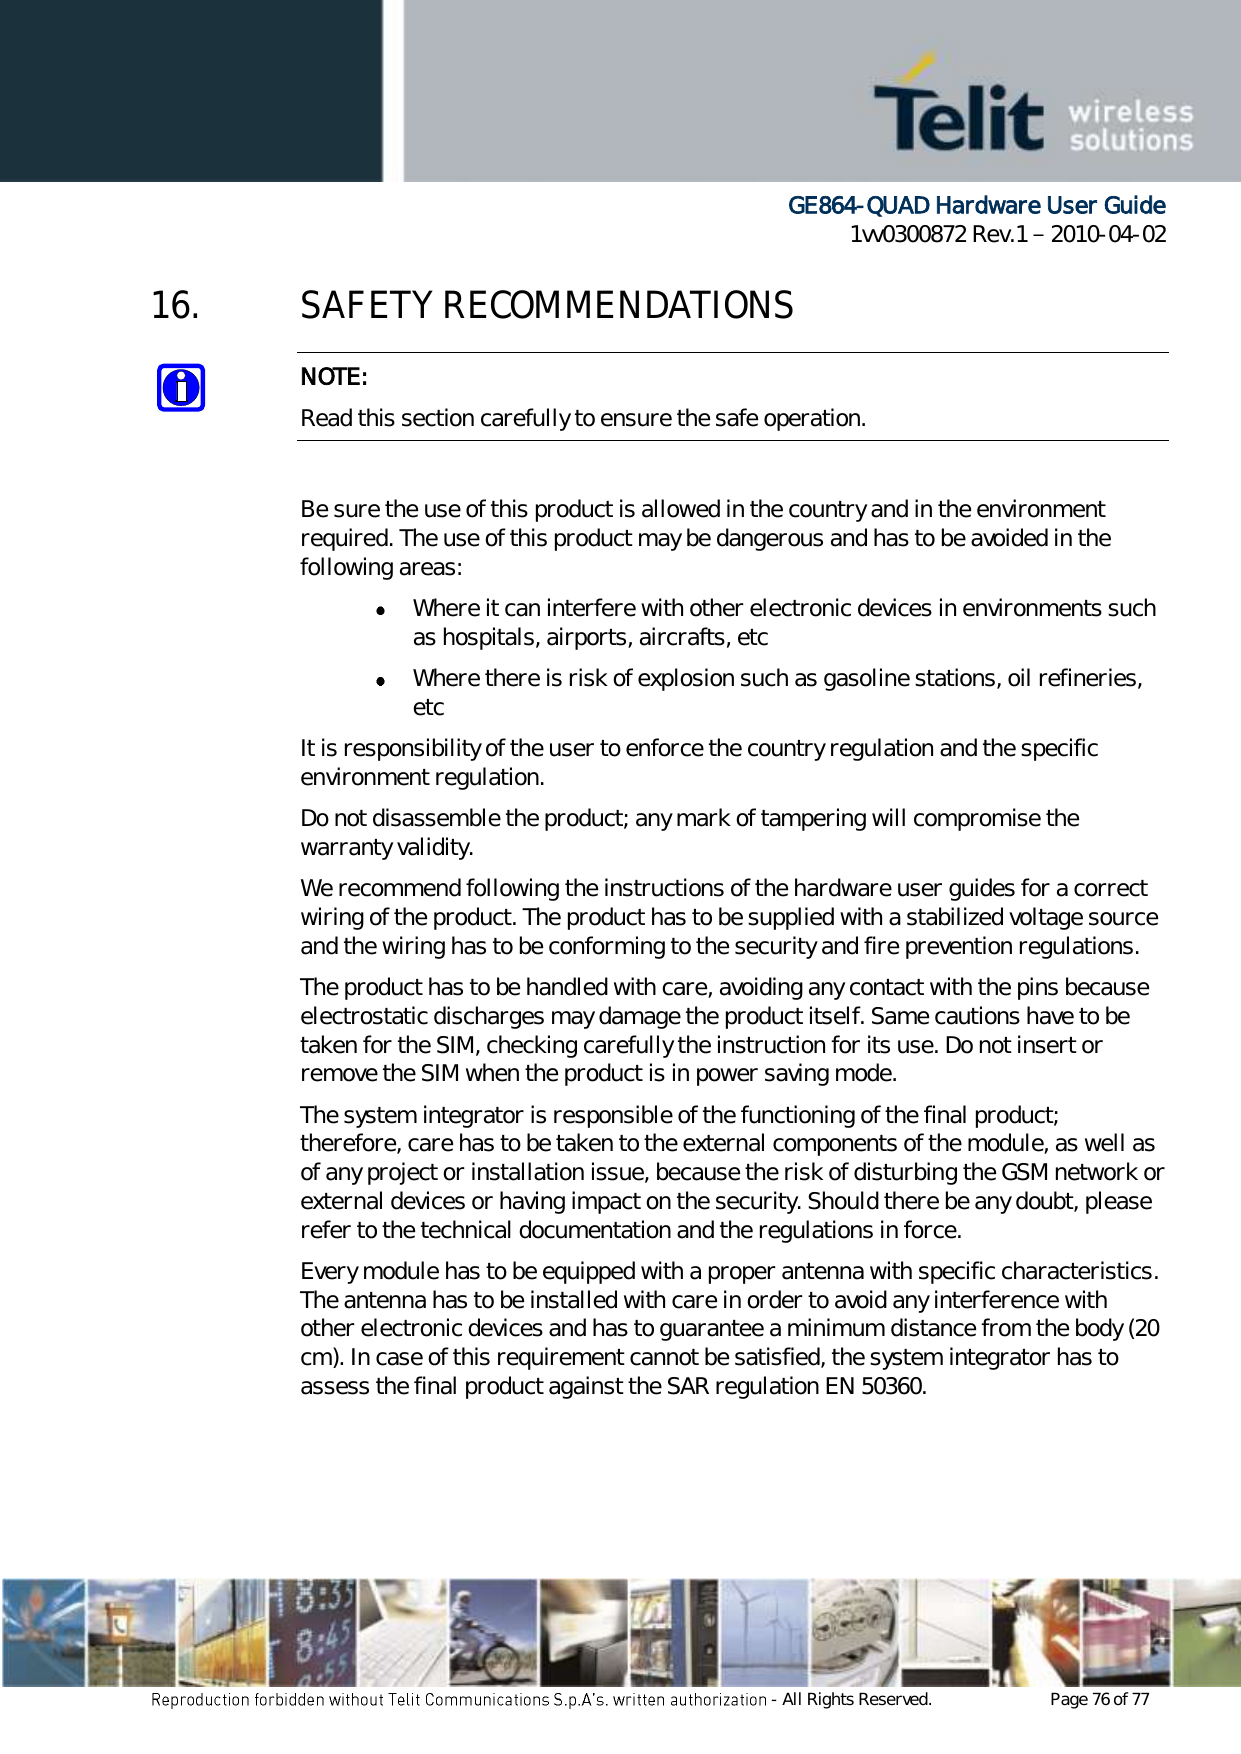      GE864-QUAD Hardware User Guide 1vv0300872 Rev.1   2010-04-02 - All Rights Reserved.    Page 76 of 77  16. SAFETY RECOMMENDATIONS NOTE: Read this section carefully to ensure the safe operation.  Be sure the use of this product is allowed in the country and in the environment required. The use of this product may be dangerous and has to be avoided in the following areas:  Where it can interfere with other electronic devices in environments such as hospitals, airports, aircrafts, etc  Where there is risk of explosion such as gasoline stations, oil refineries, etc  It is responsibility of the user to enforce the country regulation and the specific environment regulation. Do not disassemble the product; any mark of tampering will compromise the warranty validity. We recommend following the instructions of the hardware user guides for a correct wiring of the product. The product has to be supplied with a stabilized voltage source and the wiring has to be conforming to the security and fire prevention regulations. The product has to be handled with care, avoiding any contact with the pins because electrostatic discharges may damage the product itself. Same cautions have to be taken for the SIM, checking carefully the instruction for its use. Do not insert or remove the SIM when the product is in power saving mode. The system integrator is responsible of the functioning of the final product; therefore, care has to be taken to the external components of the module, as well as of any project or installation issue, because the risk of disturbing the GSM network or external devices or having impact on the security. Should there be any doubt, please refer to the technical documentation and the regulations in force. Every module has to be equipped with a proper antenna with specific characteristics. The antenna has to be installed with care in order to avoid any interference with other electronic devices and has to guarantee a minimum distance from the body (20 cm). In case of this requirement cannot be satisfied, the system integrator has to assess the final product against the SAR regulation EN 50360.  